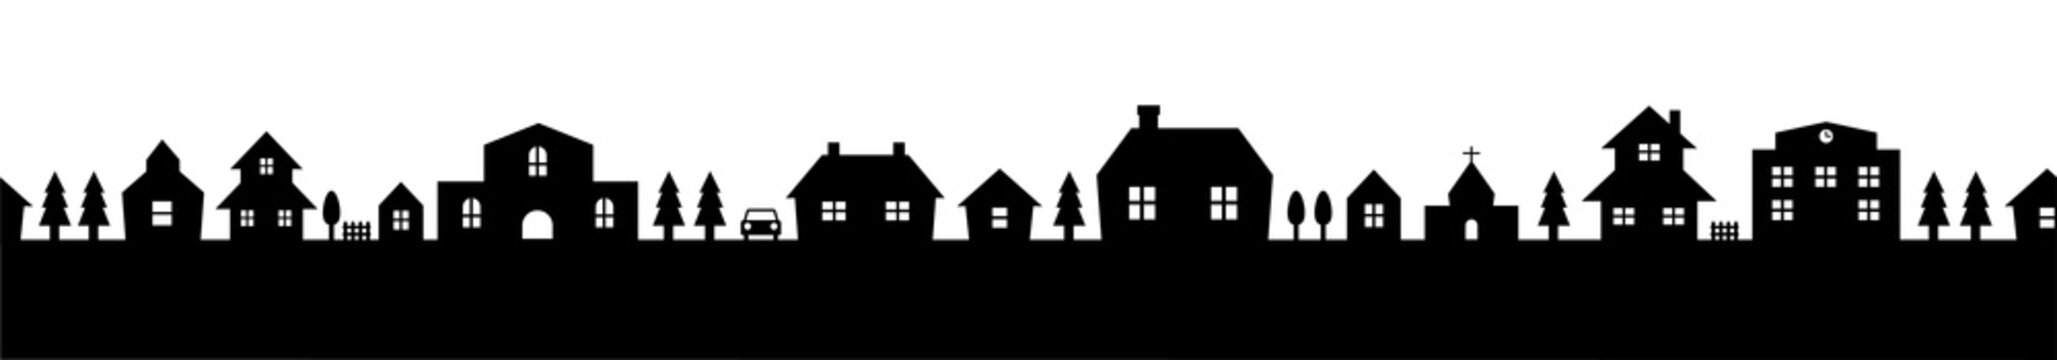 Cityscape silhouette illustration (seamless) / png, no background © barks